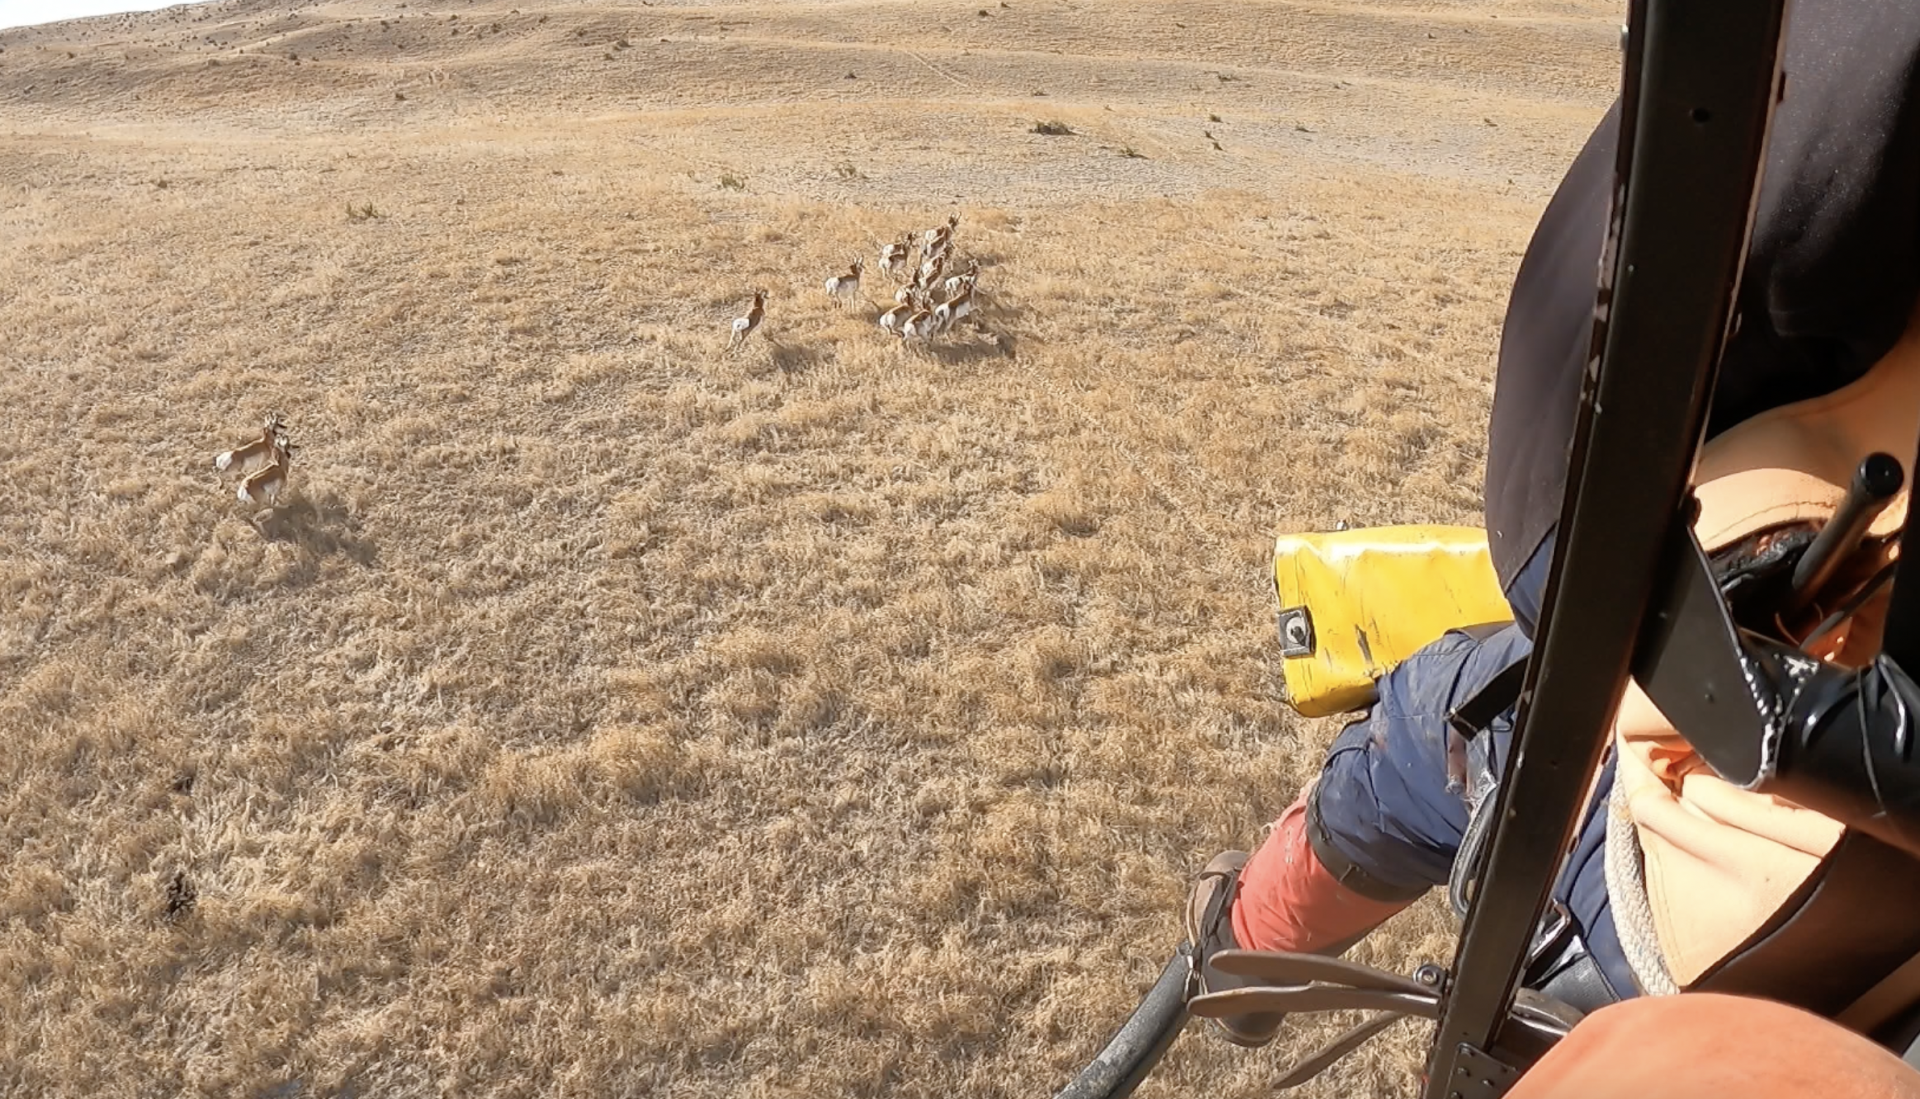 Helicopter capture of pronghorn